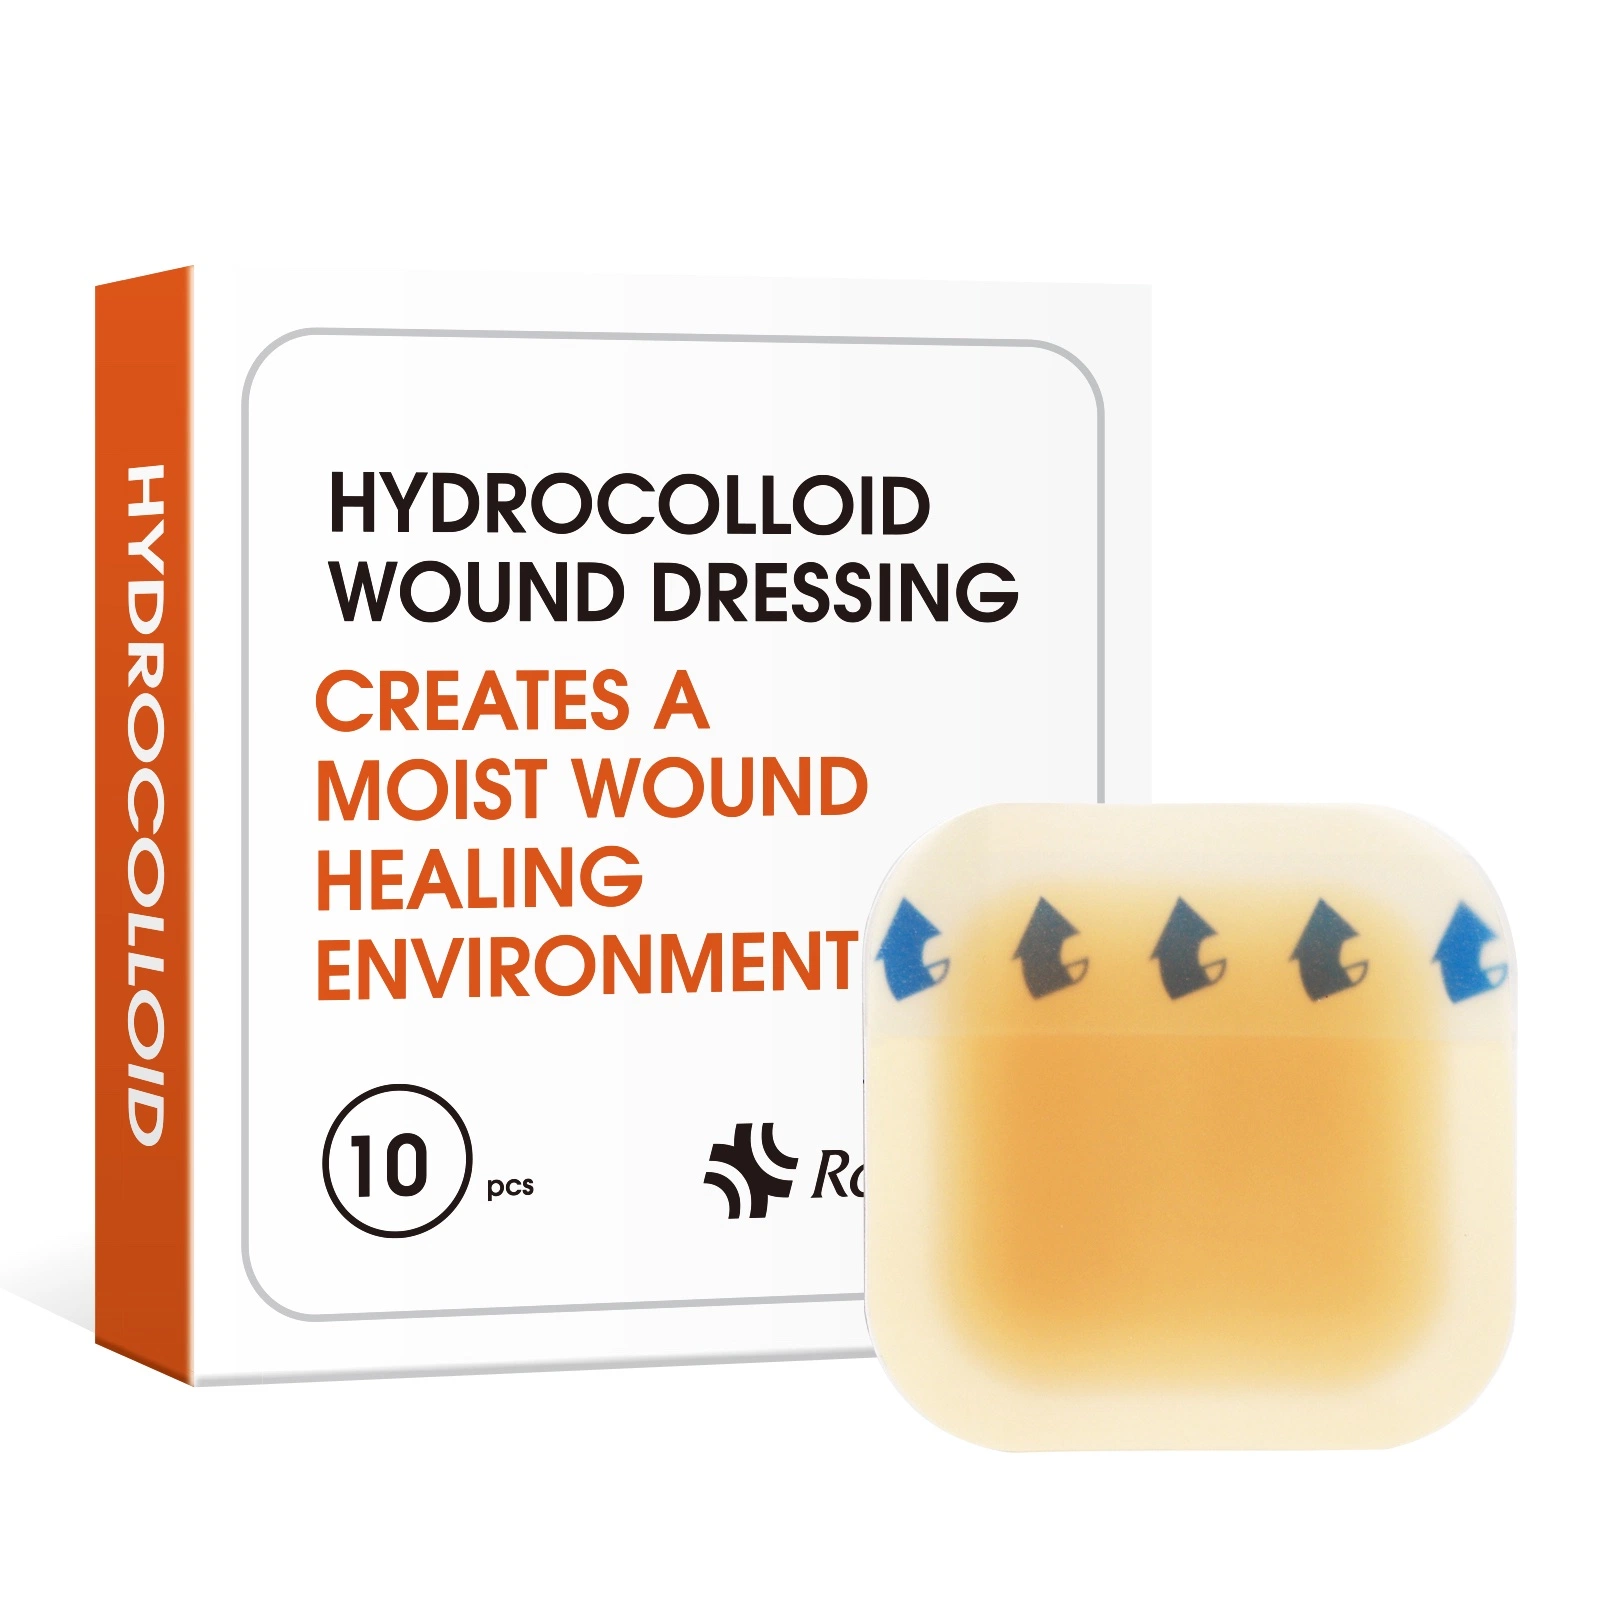 Hydrocolloid Adhesive Wound Dressing Pads, Medical Surgical Dressing